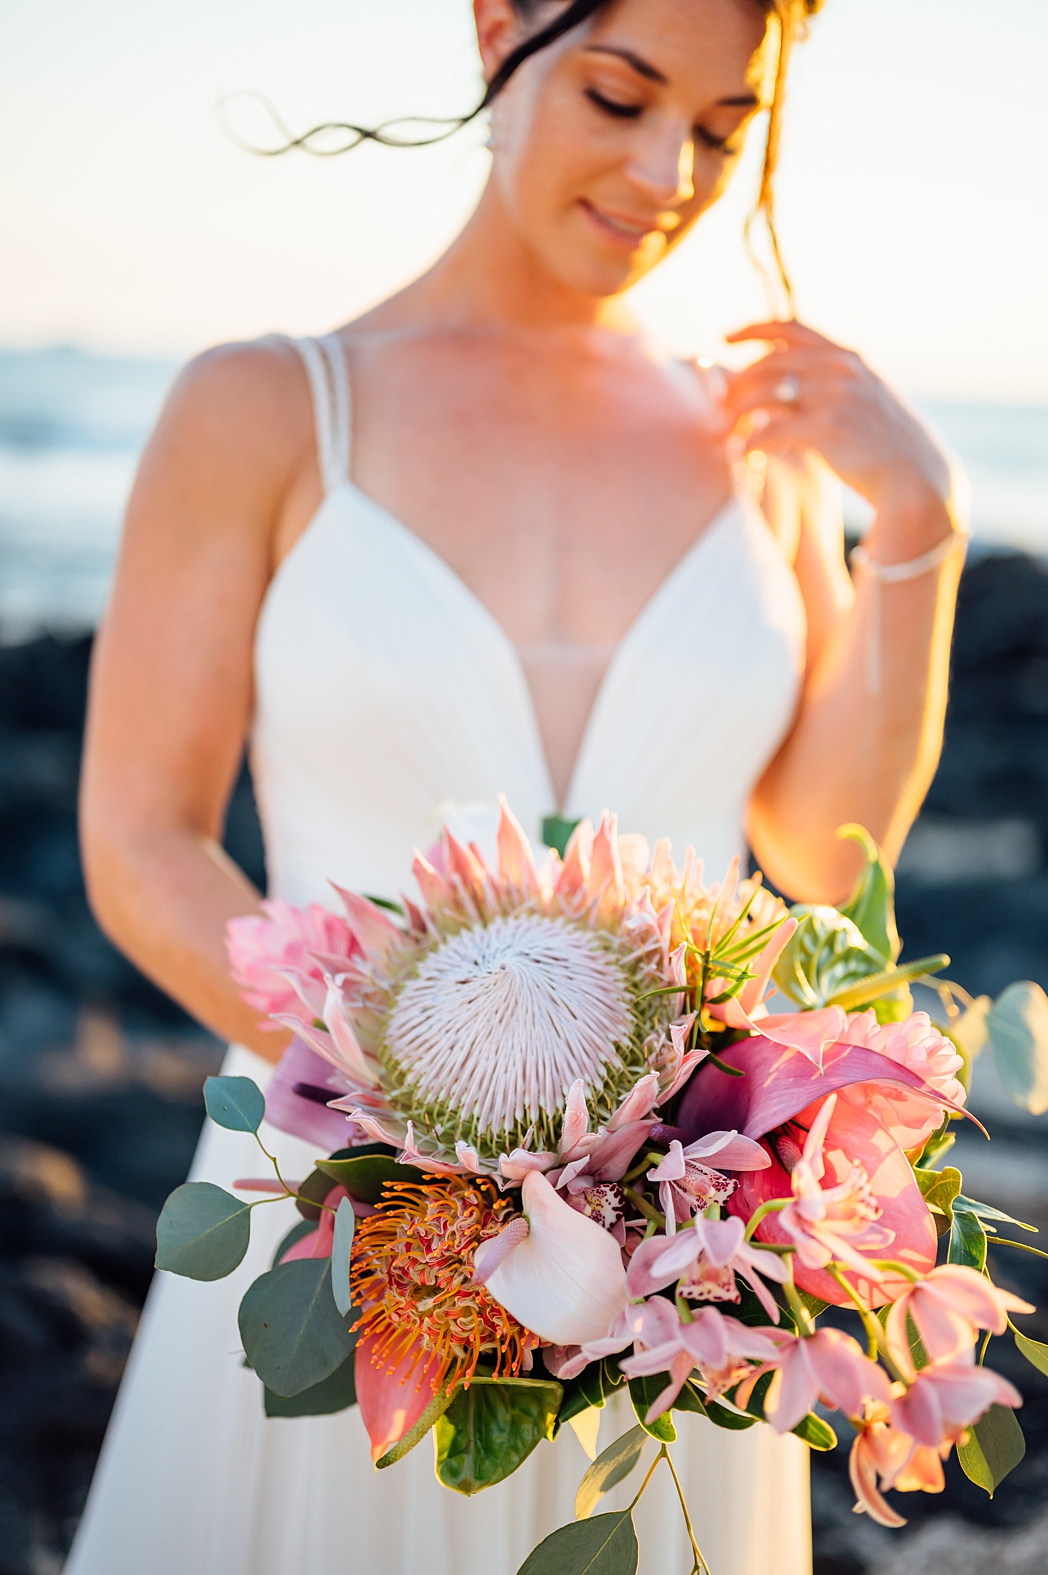 lovely bride and bouquet by Kona wedding photographer